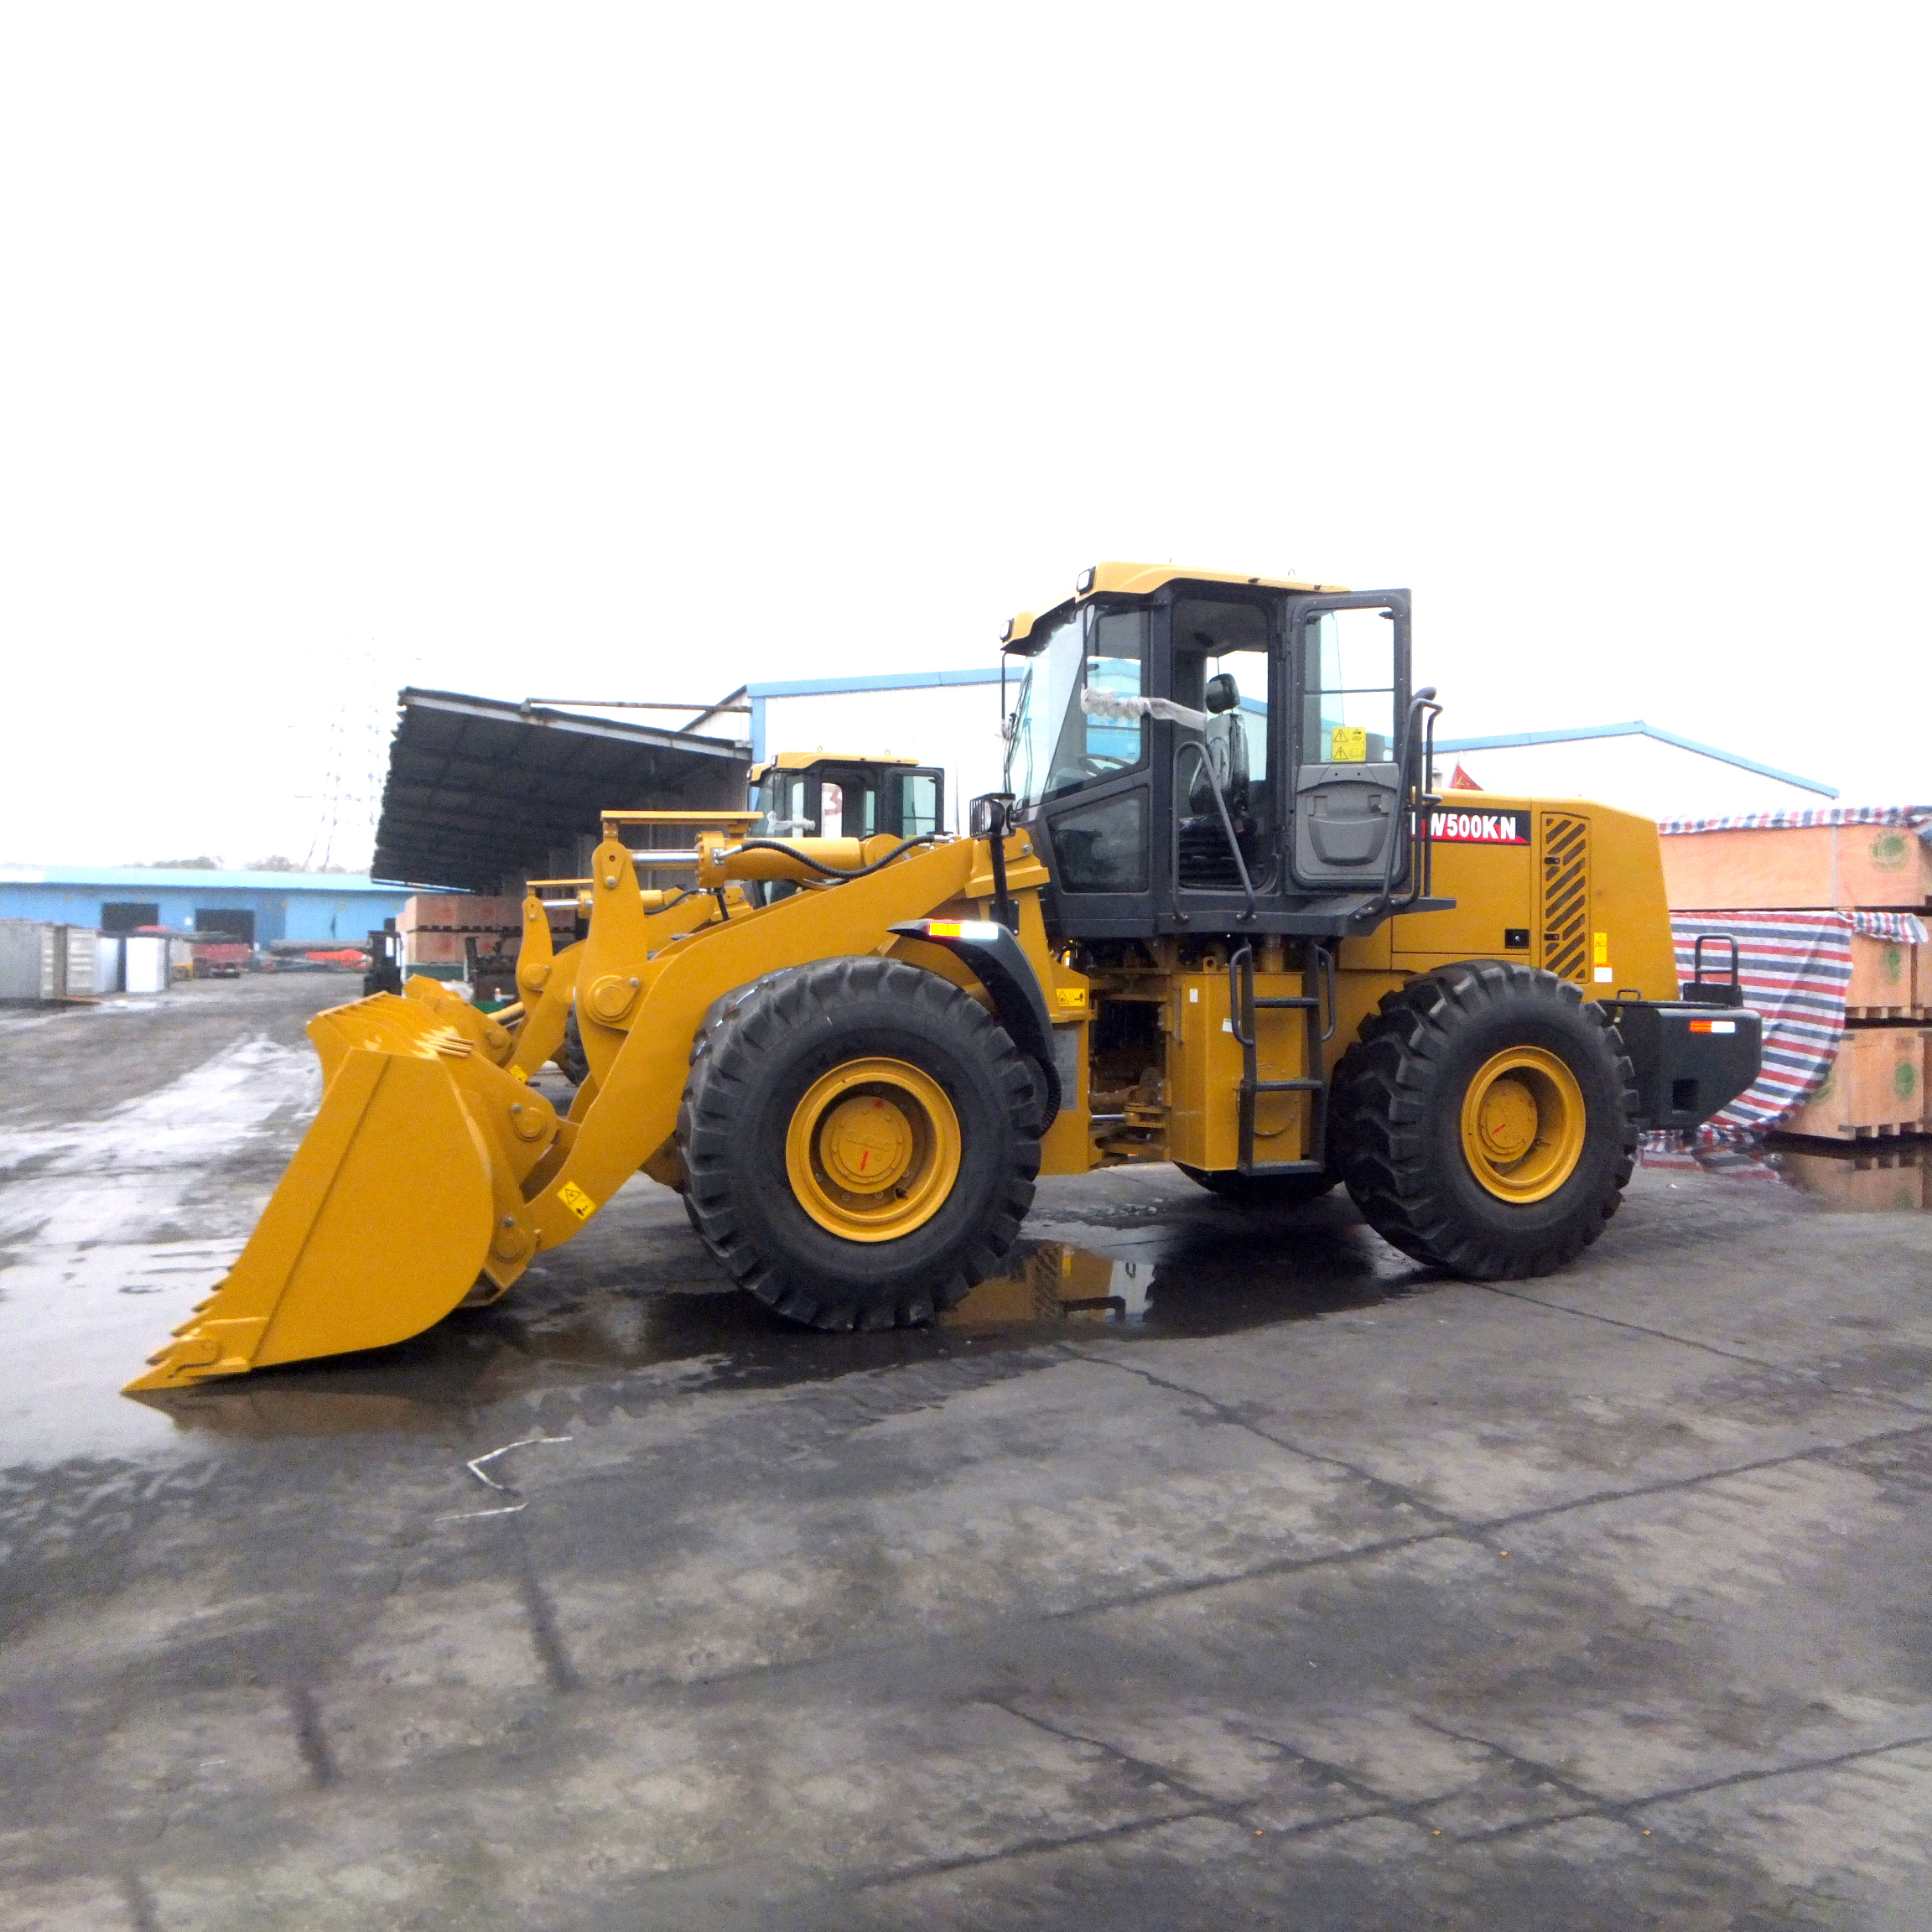 XCMG Official Used Wheel Loader LW500KN for sale